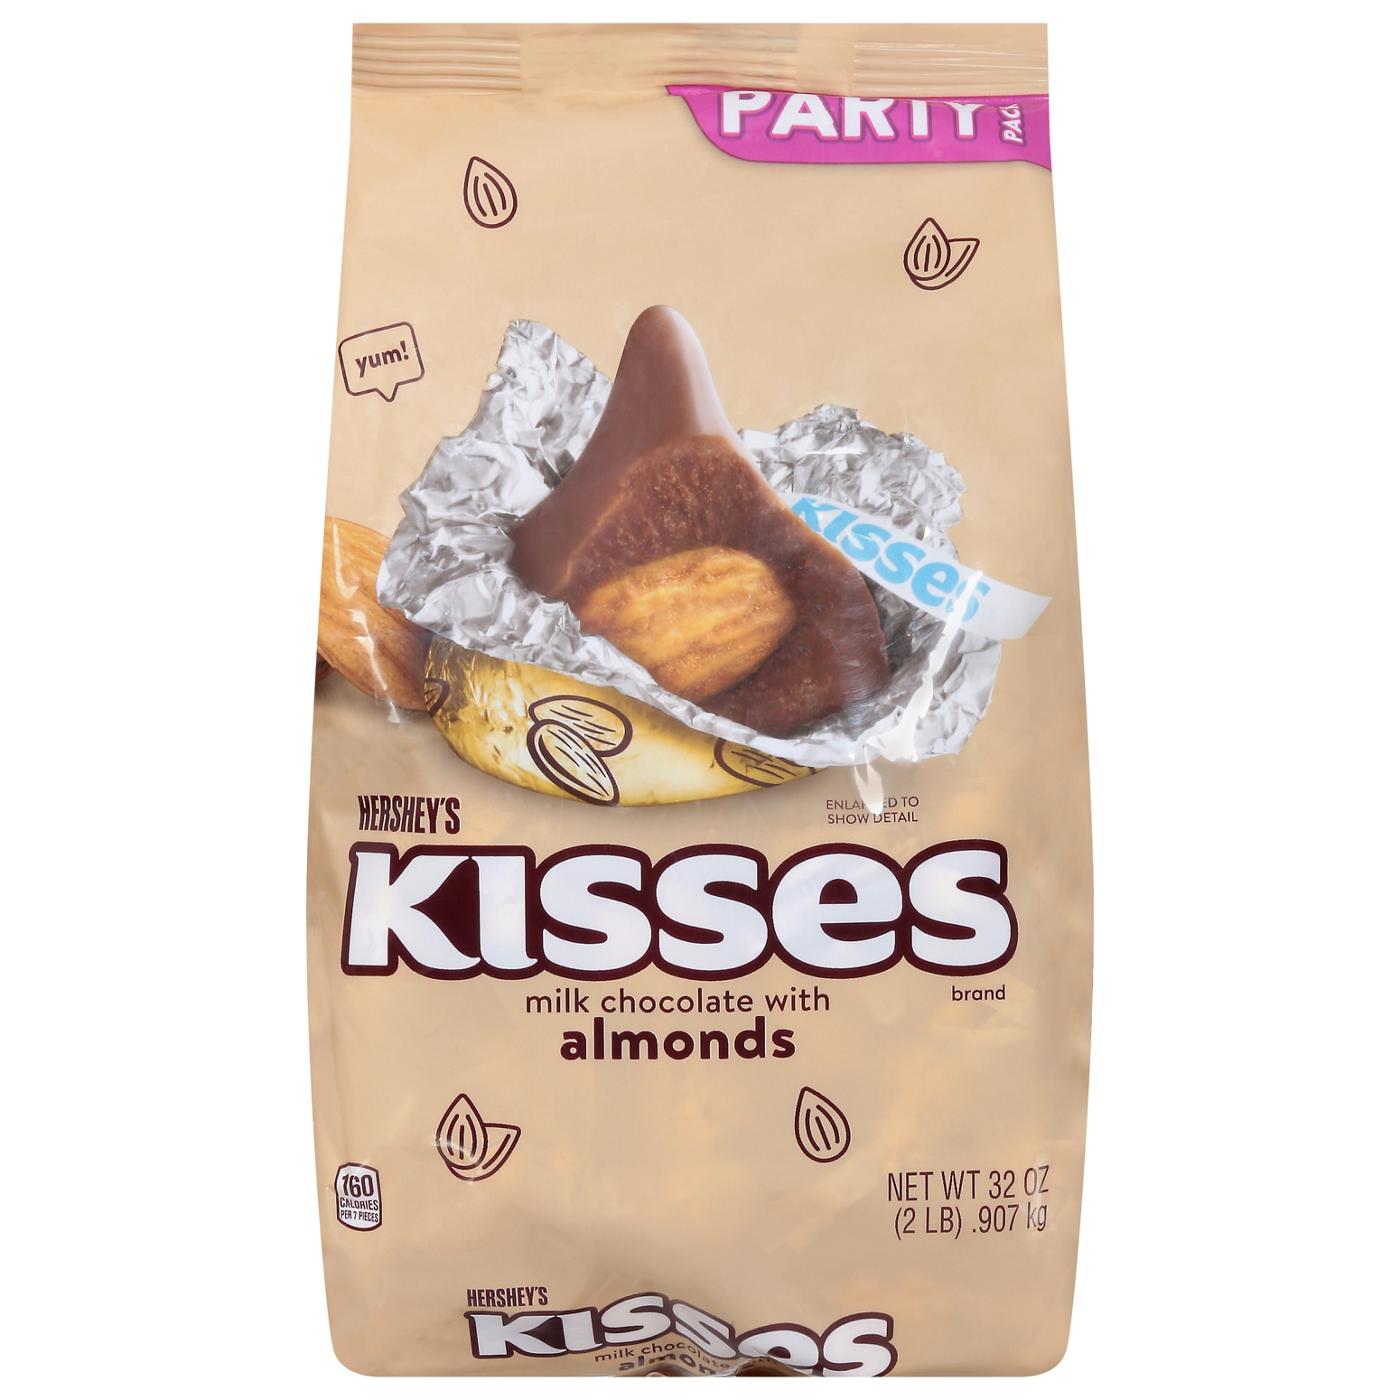 Hershey's Kisses Milk Chocolate with Almonds Candy - Party Pack; image 1 of 7